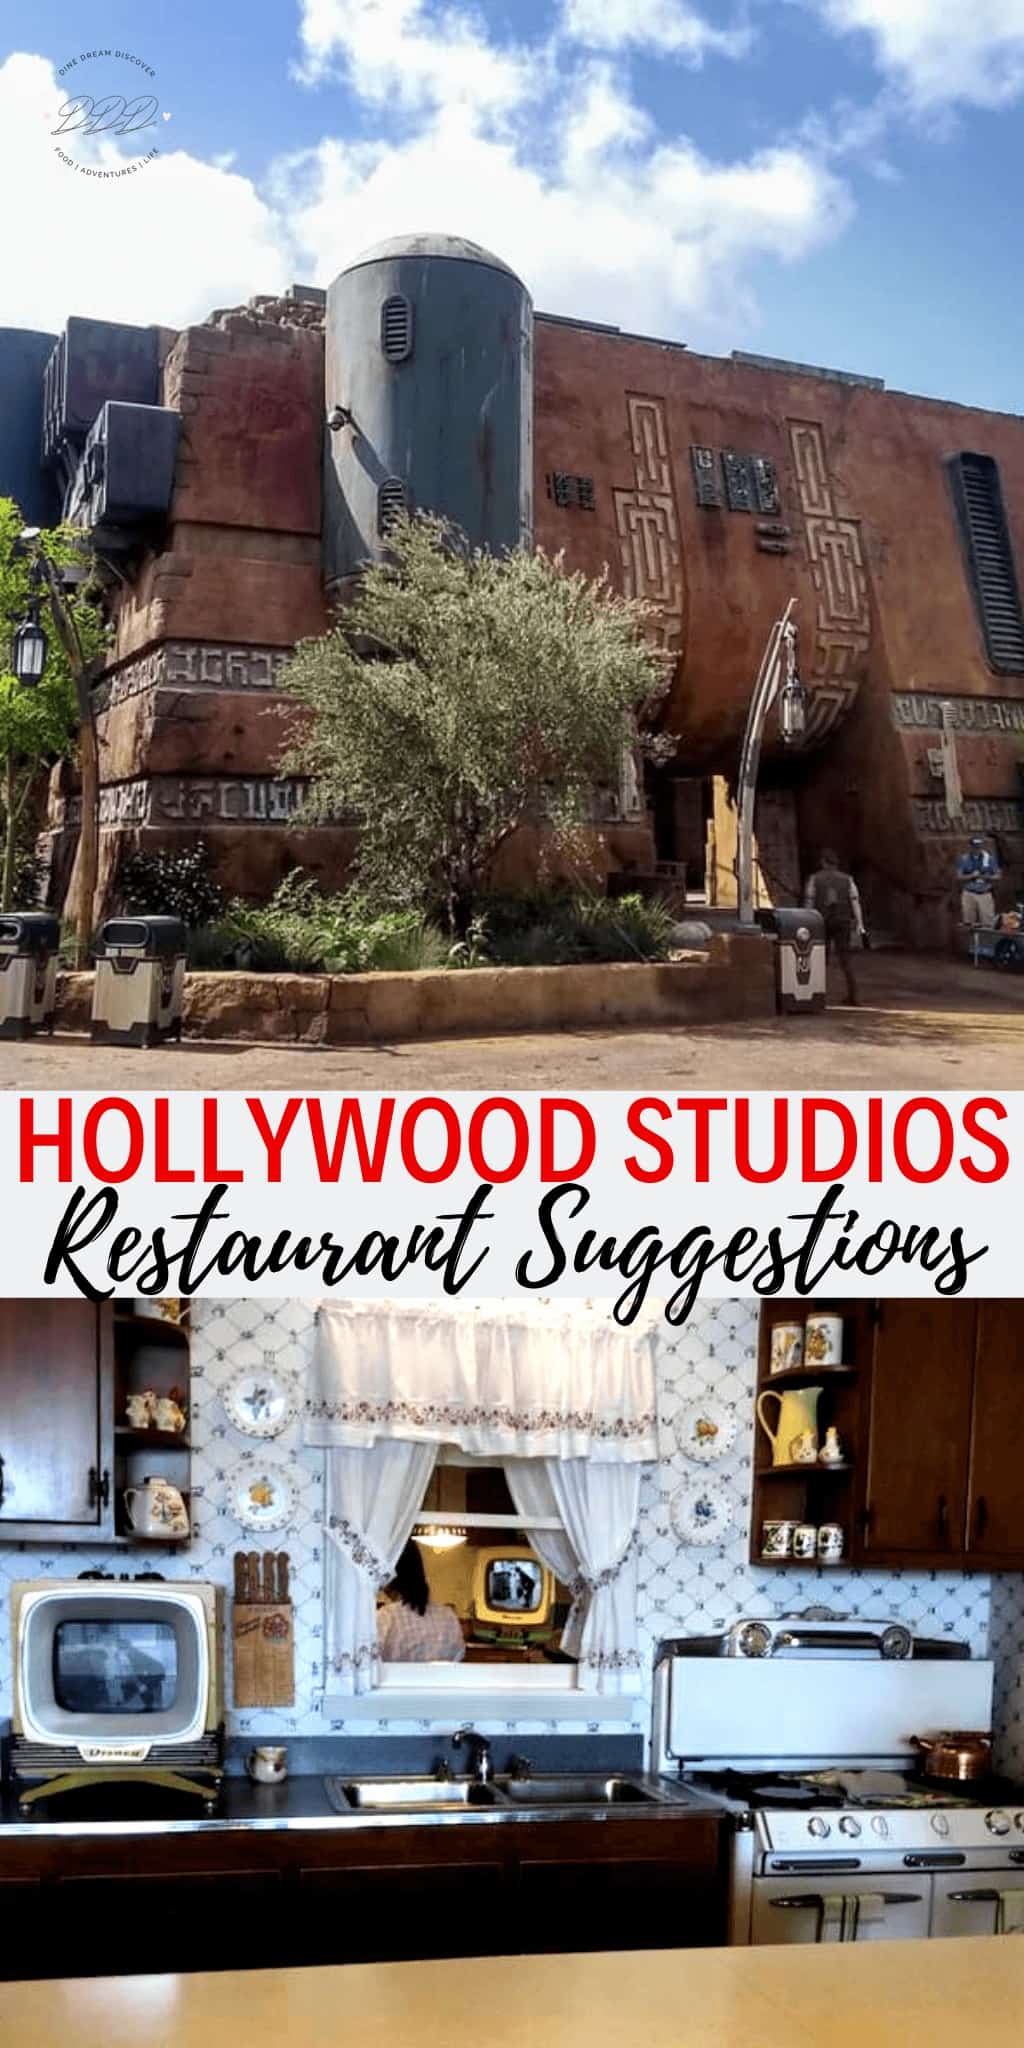 Since the park is likely to be at full capacity, you should also focus on securing reservations for these Hollywood Studios restaurants where possible.